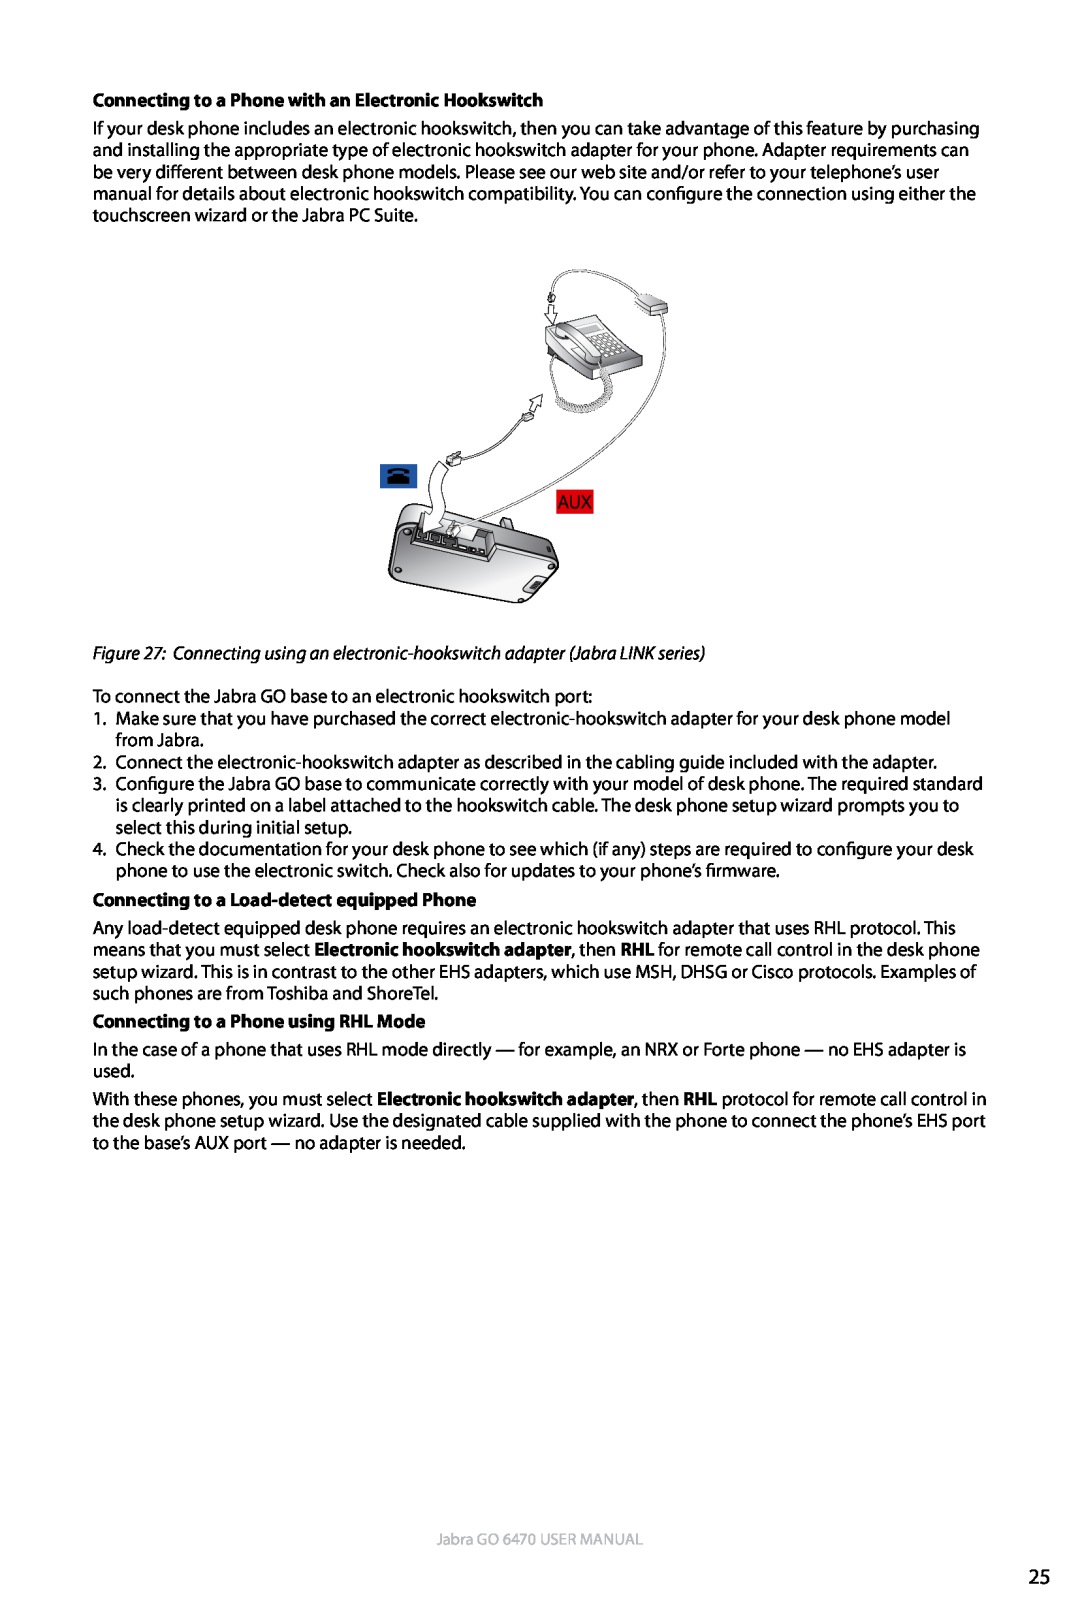 Jabra GO 6470 user manual Connecting to a Load-detectequipped Phone, Connecting to a Phone using RHL Mode 